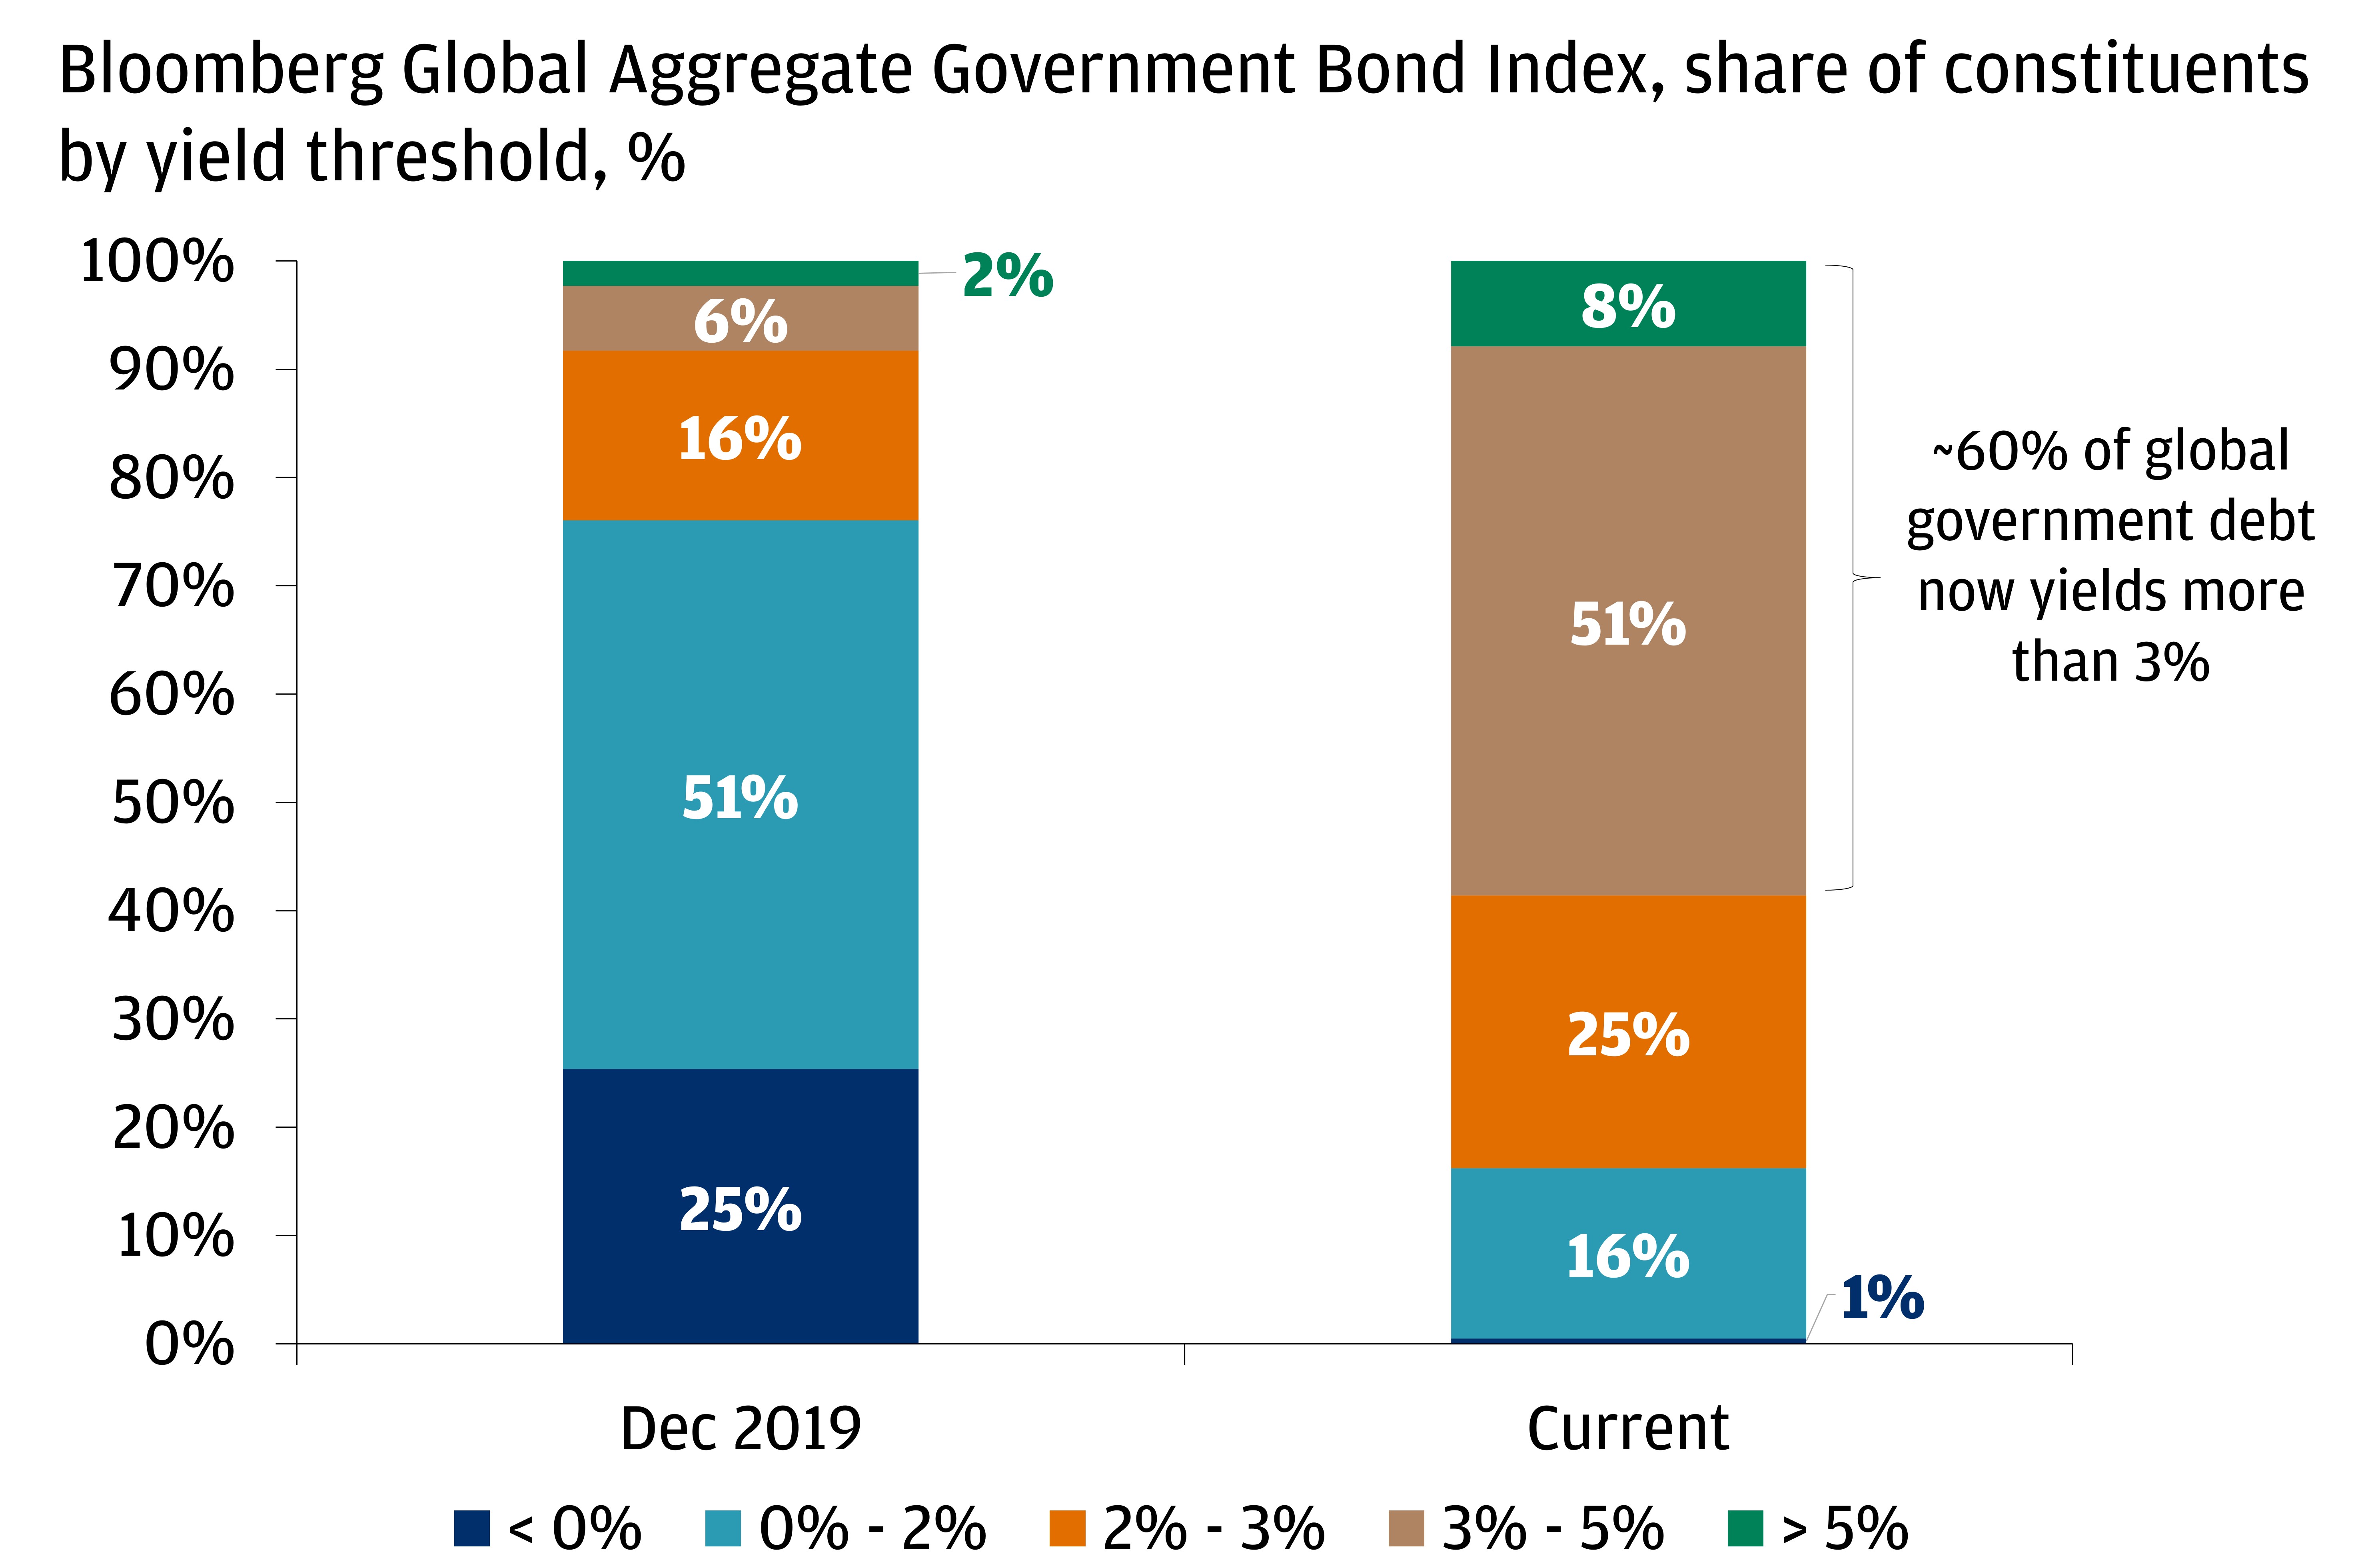 The chart shows constituents yield to worst cohorts in the Bloomberg Global Aggregate Government as a % of the total index.